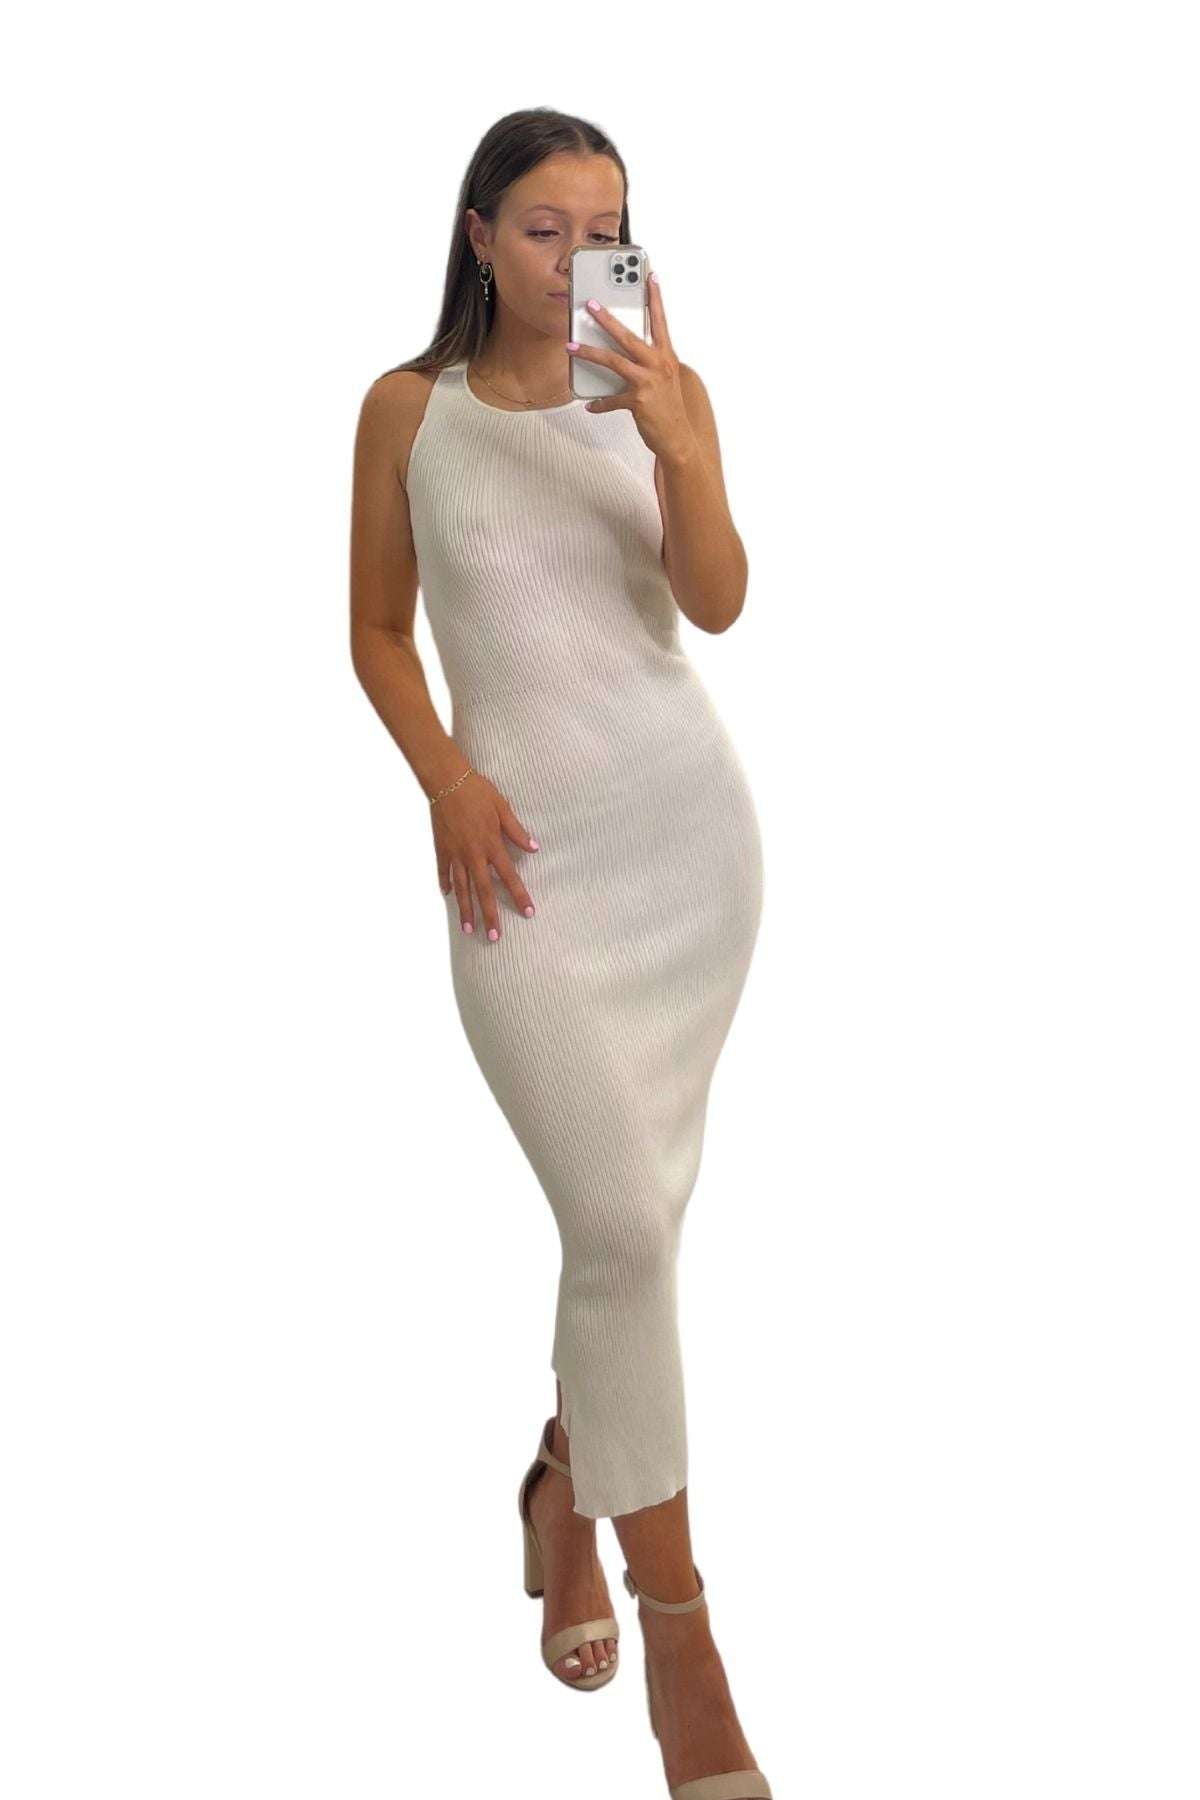 SIR the Label BUY IT SIR THE LABEL Marcelle Dress - sir-the-label-marcelle-open-back-dress-white---rrp-0-dress-for-a-night-30756810_b1728134-9b80-4589-be5d-6b763b128fc6.jpg